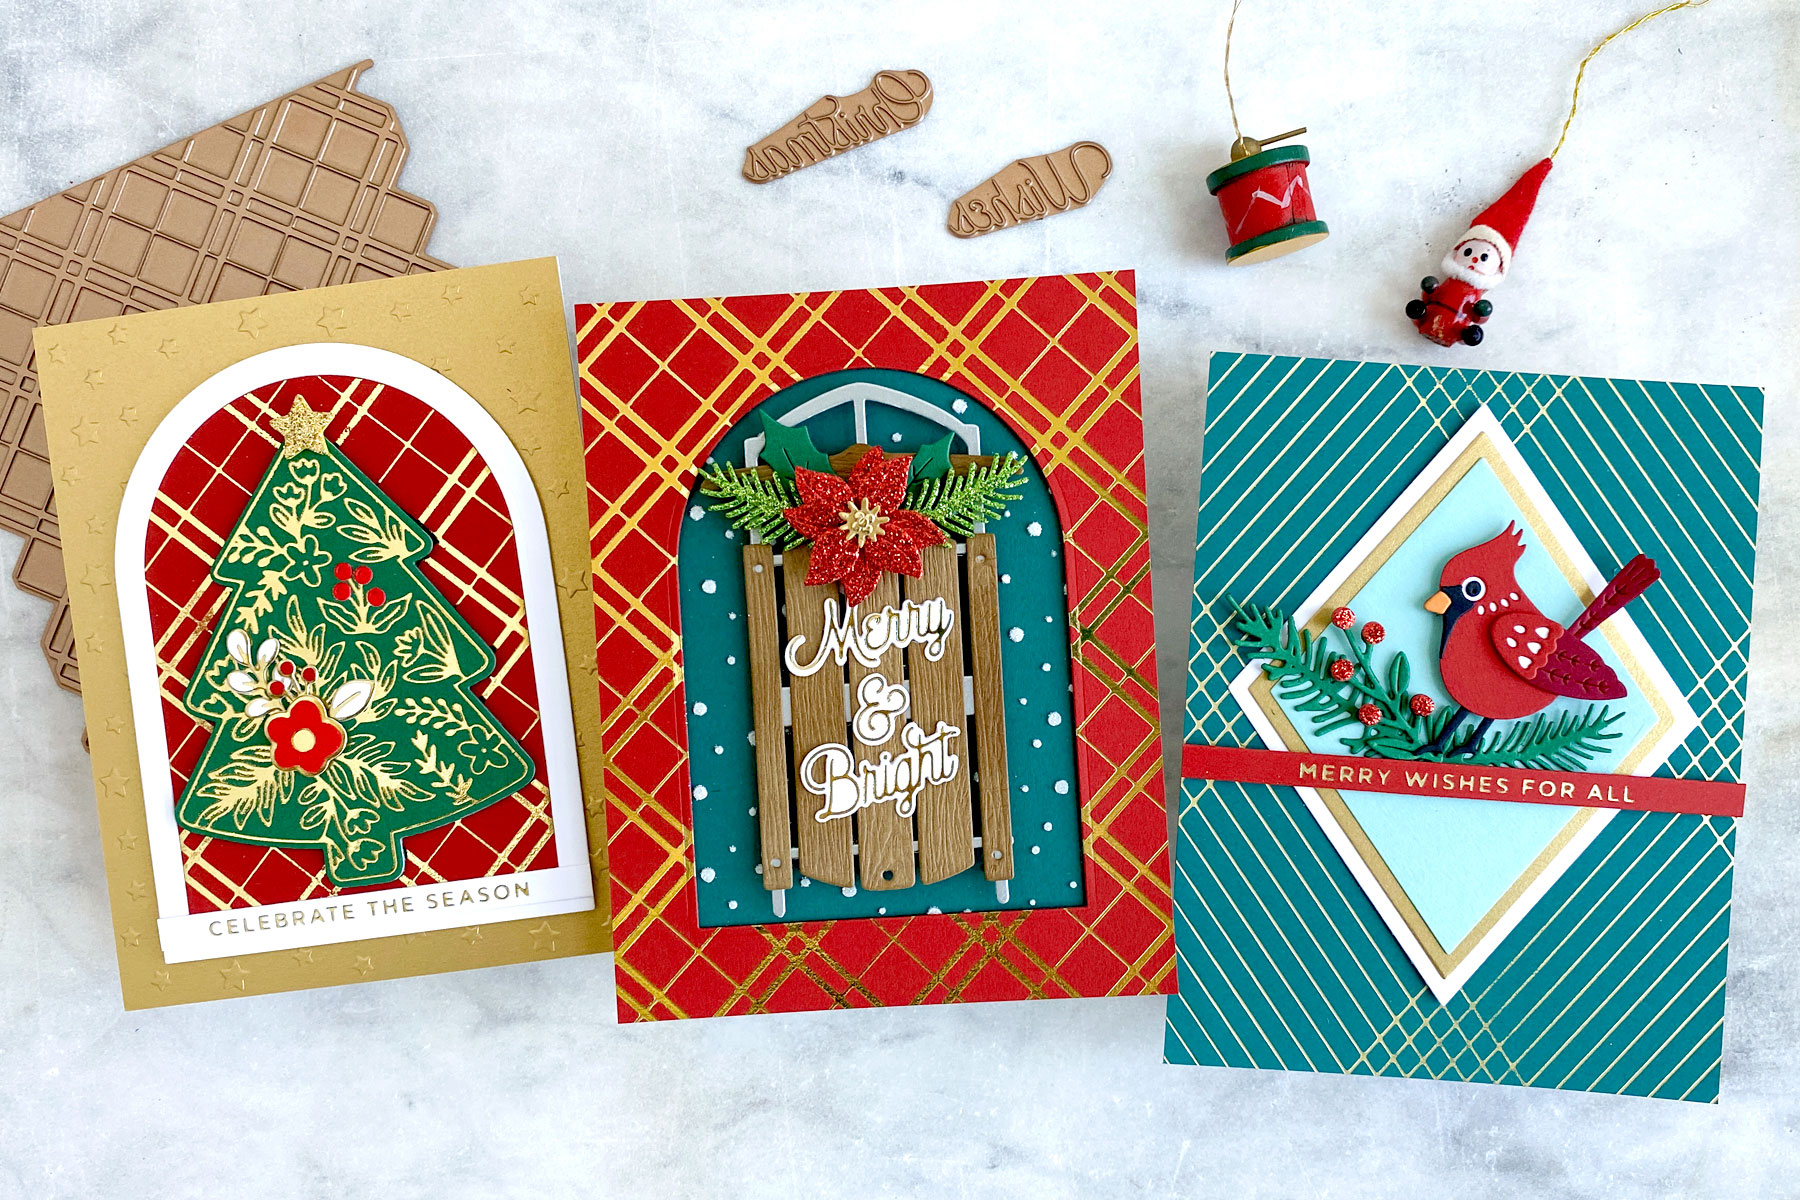 Shiny & Bright Holiday Greetings with Jean Manis - Spellbinders Blog